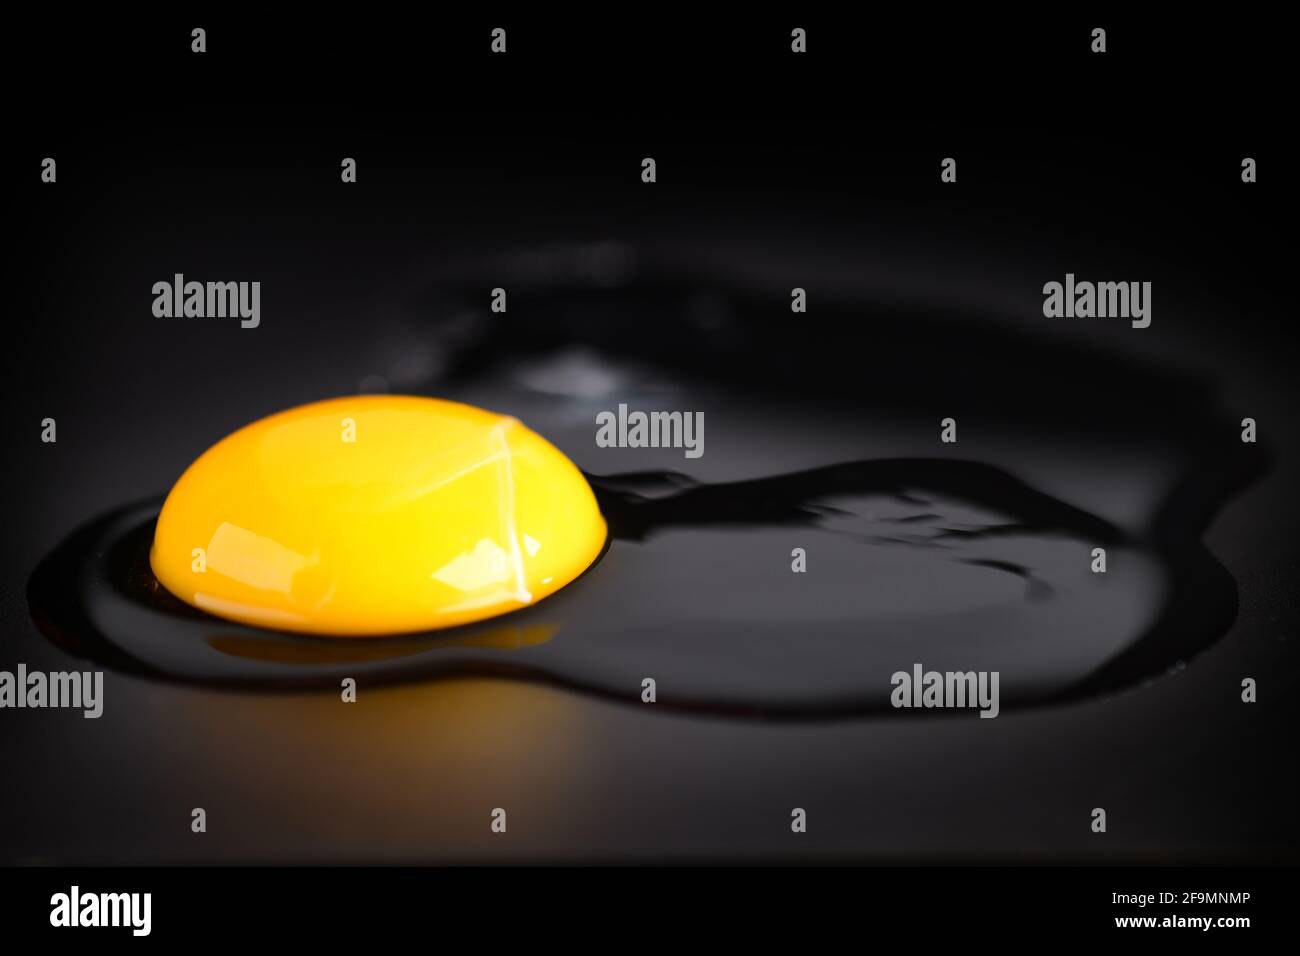 Image of an egg isolated on dark background Stock Photo